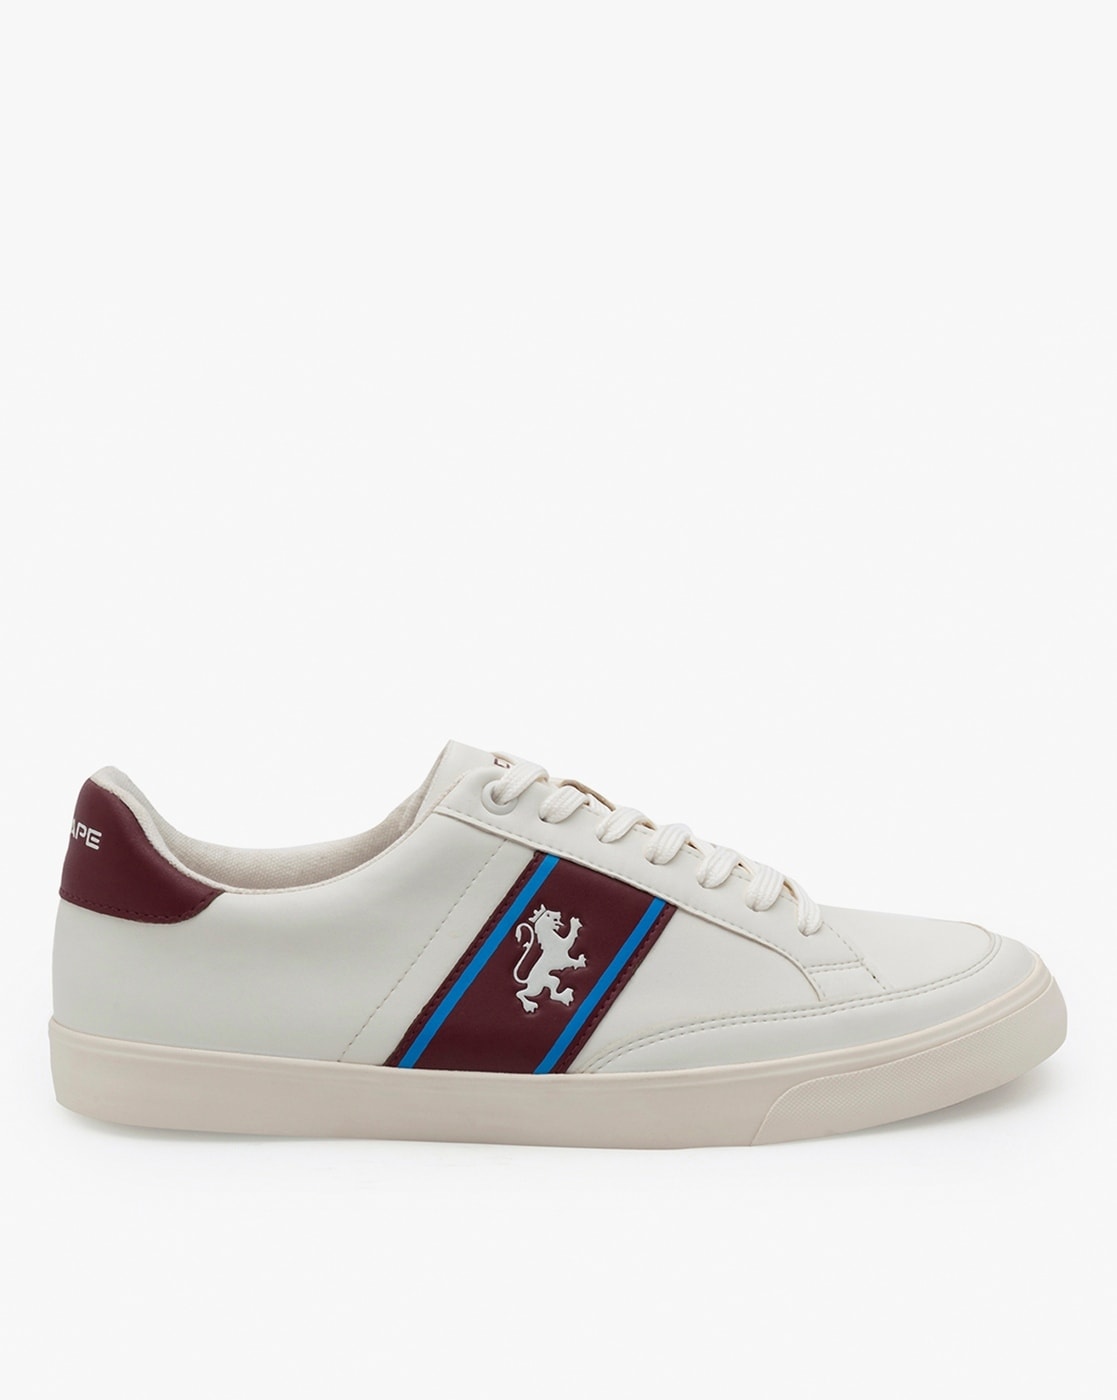 Red Tape Women's White Casual Sneakers-baongoctrading.com.vn